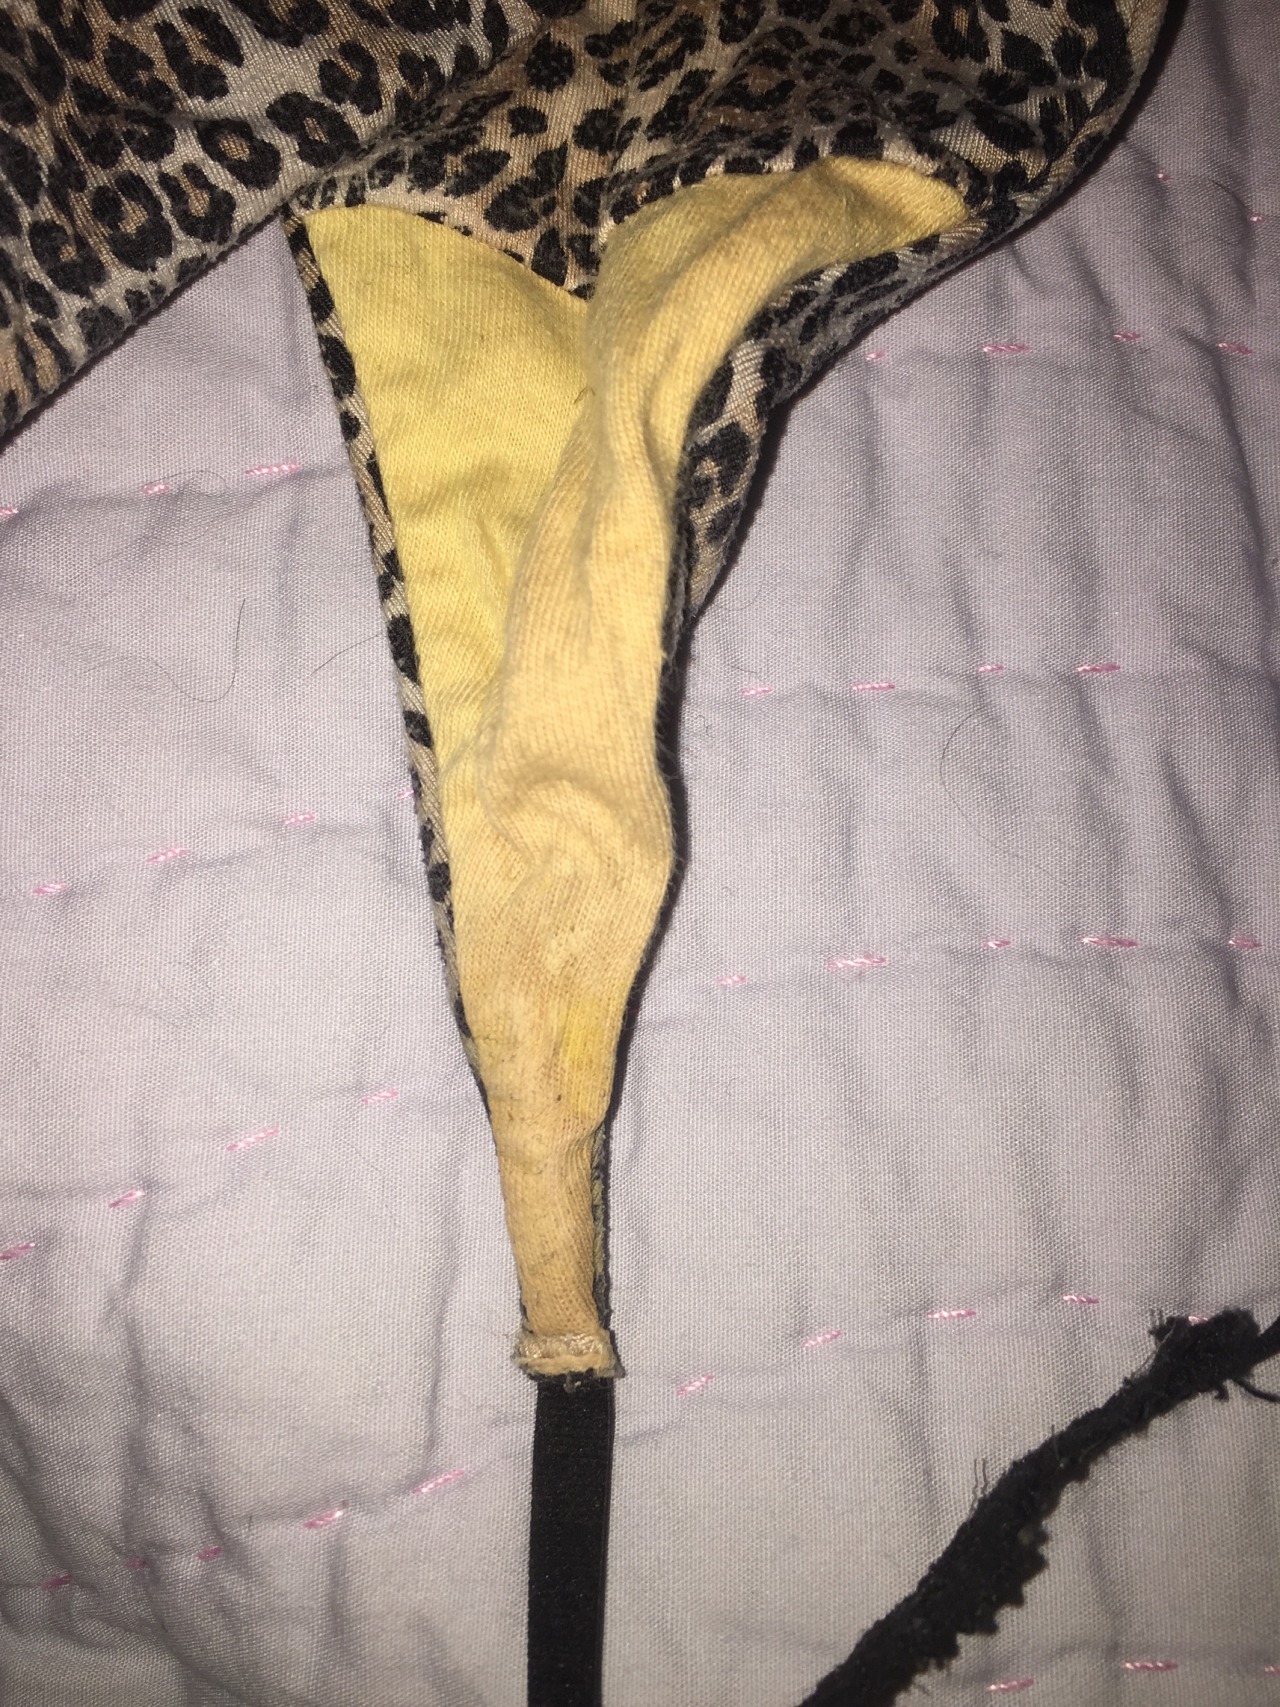 bjpantysniffer:  Wife’s friends undies. Not much of a stain, but the smell is awesome,